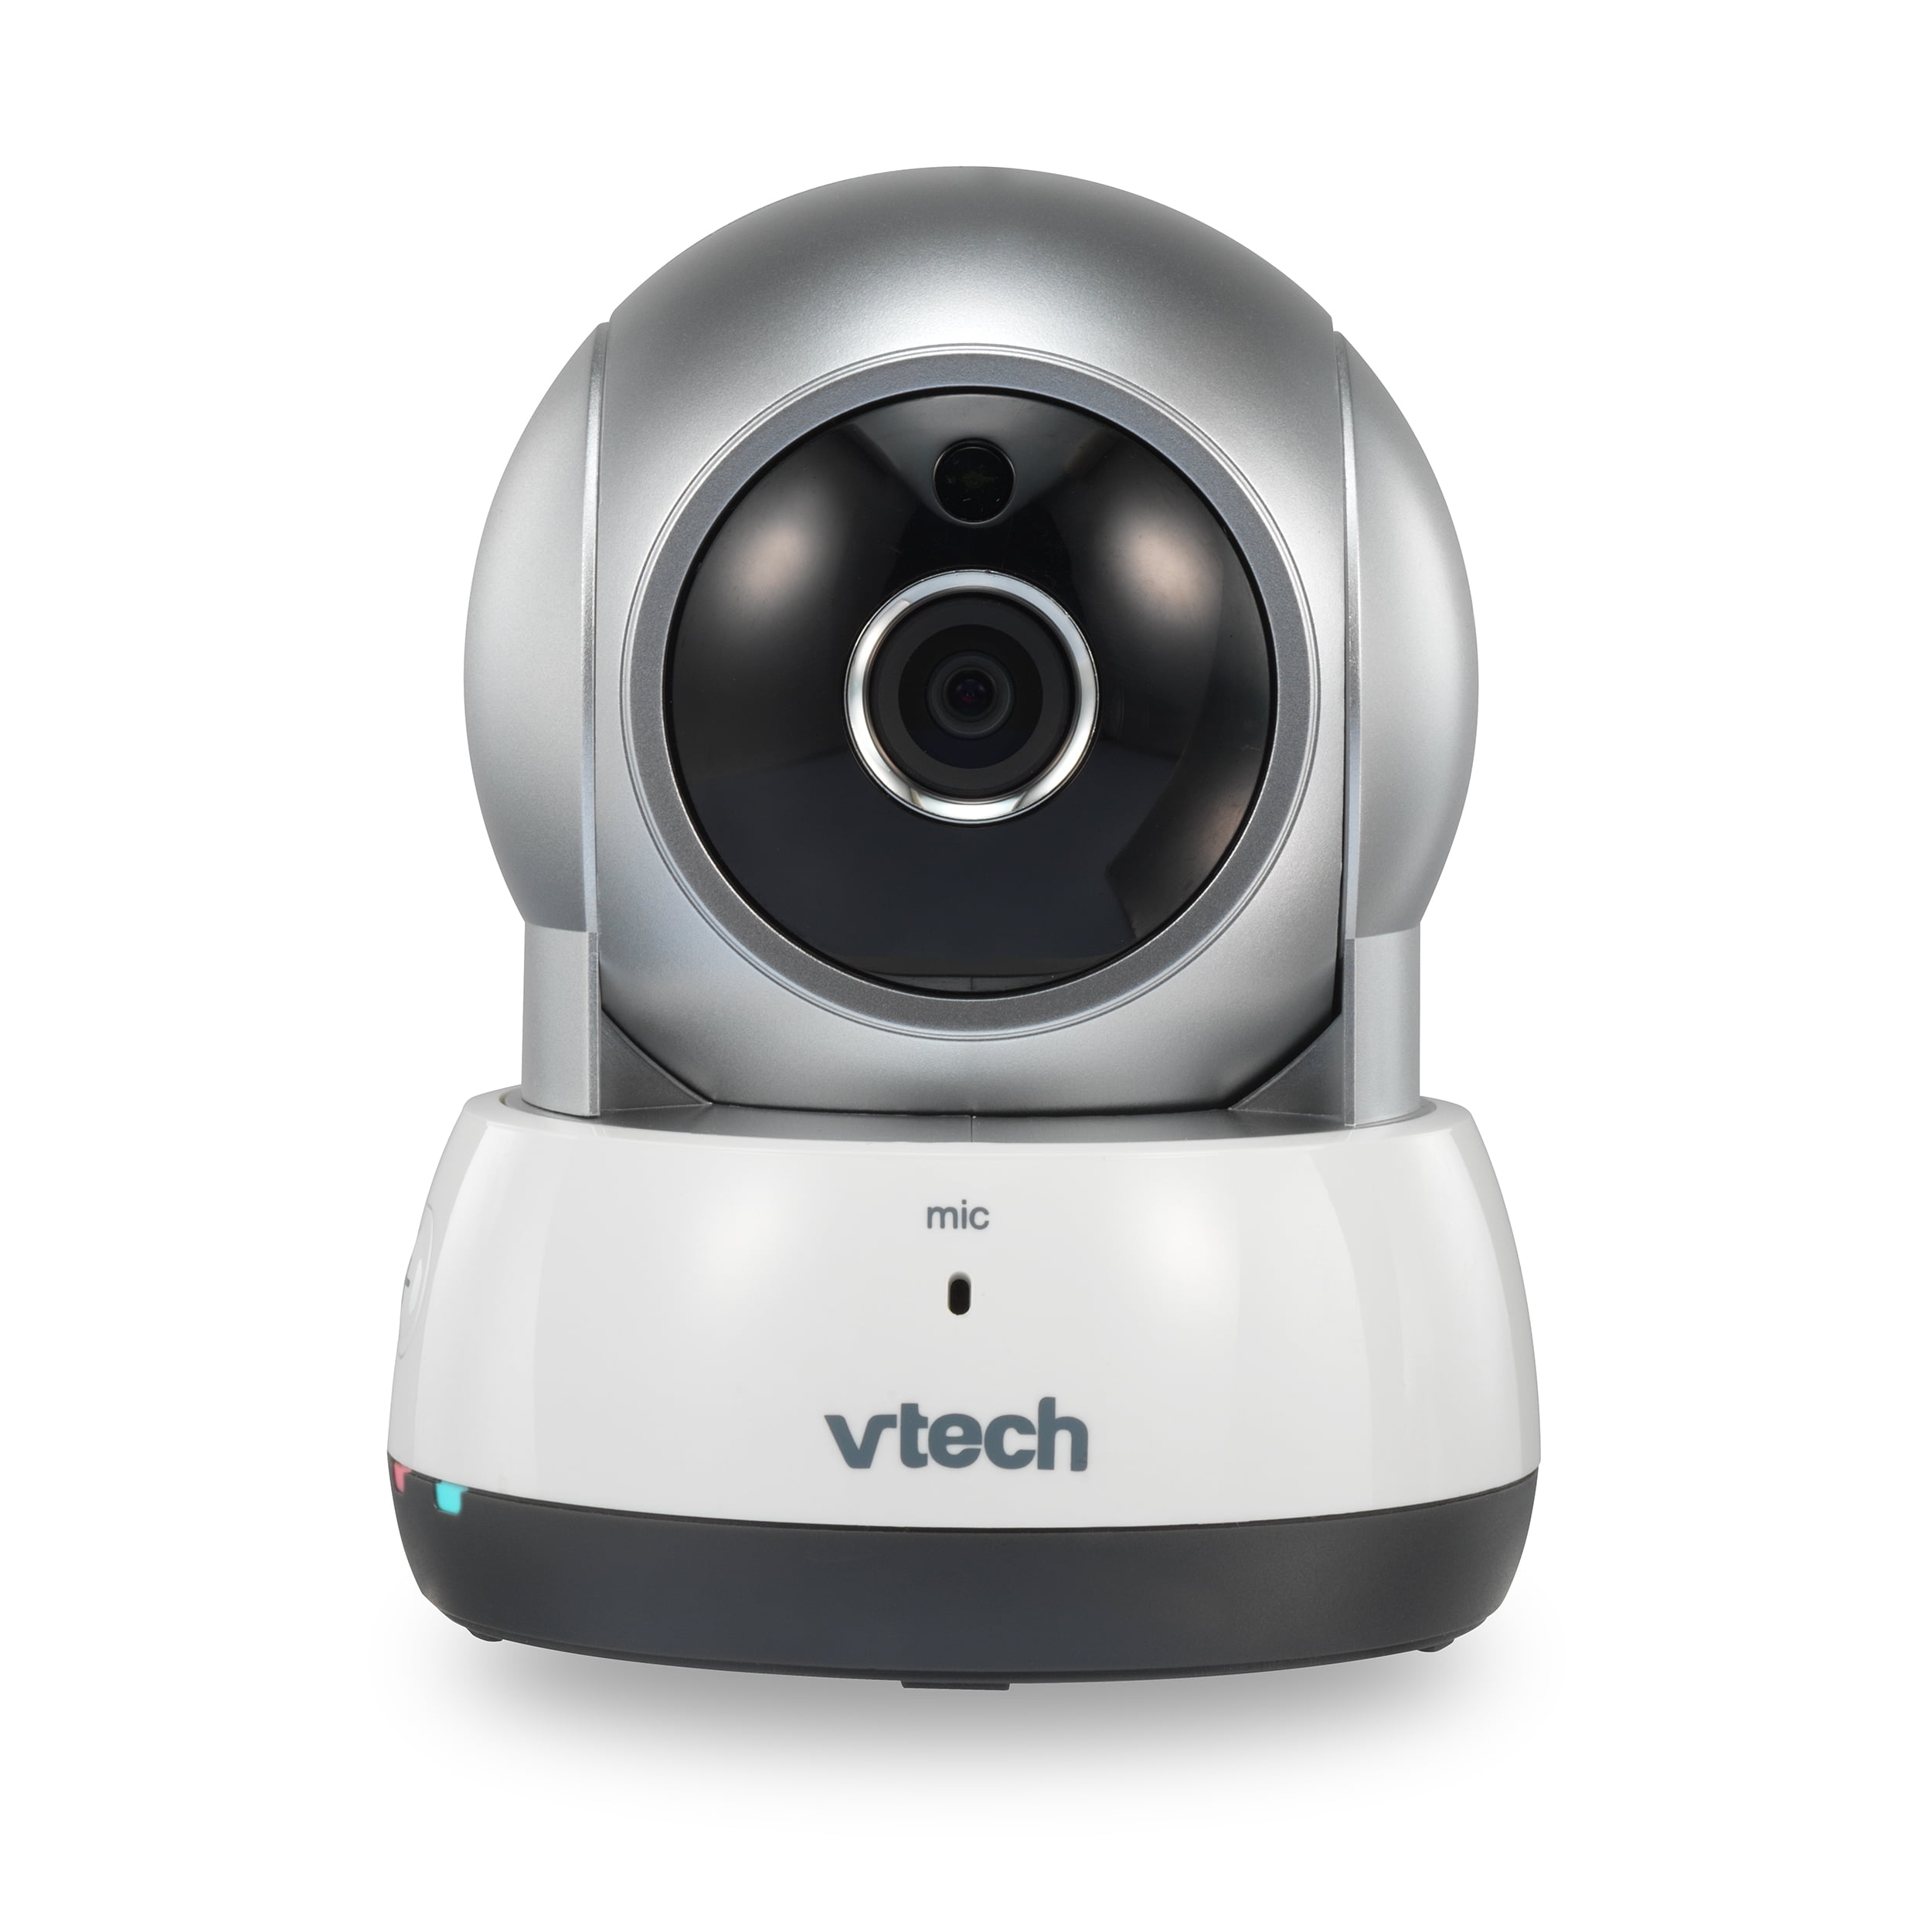 VTech VC931, Wireless IP HD Video Camera with Remote Pan and Tilt, Free Live Streaming, Infrared Night Vision, Silver